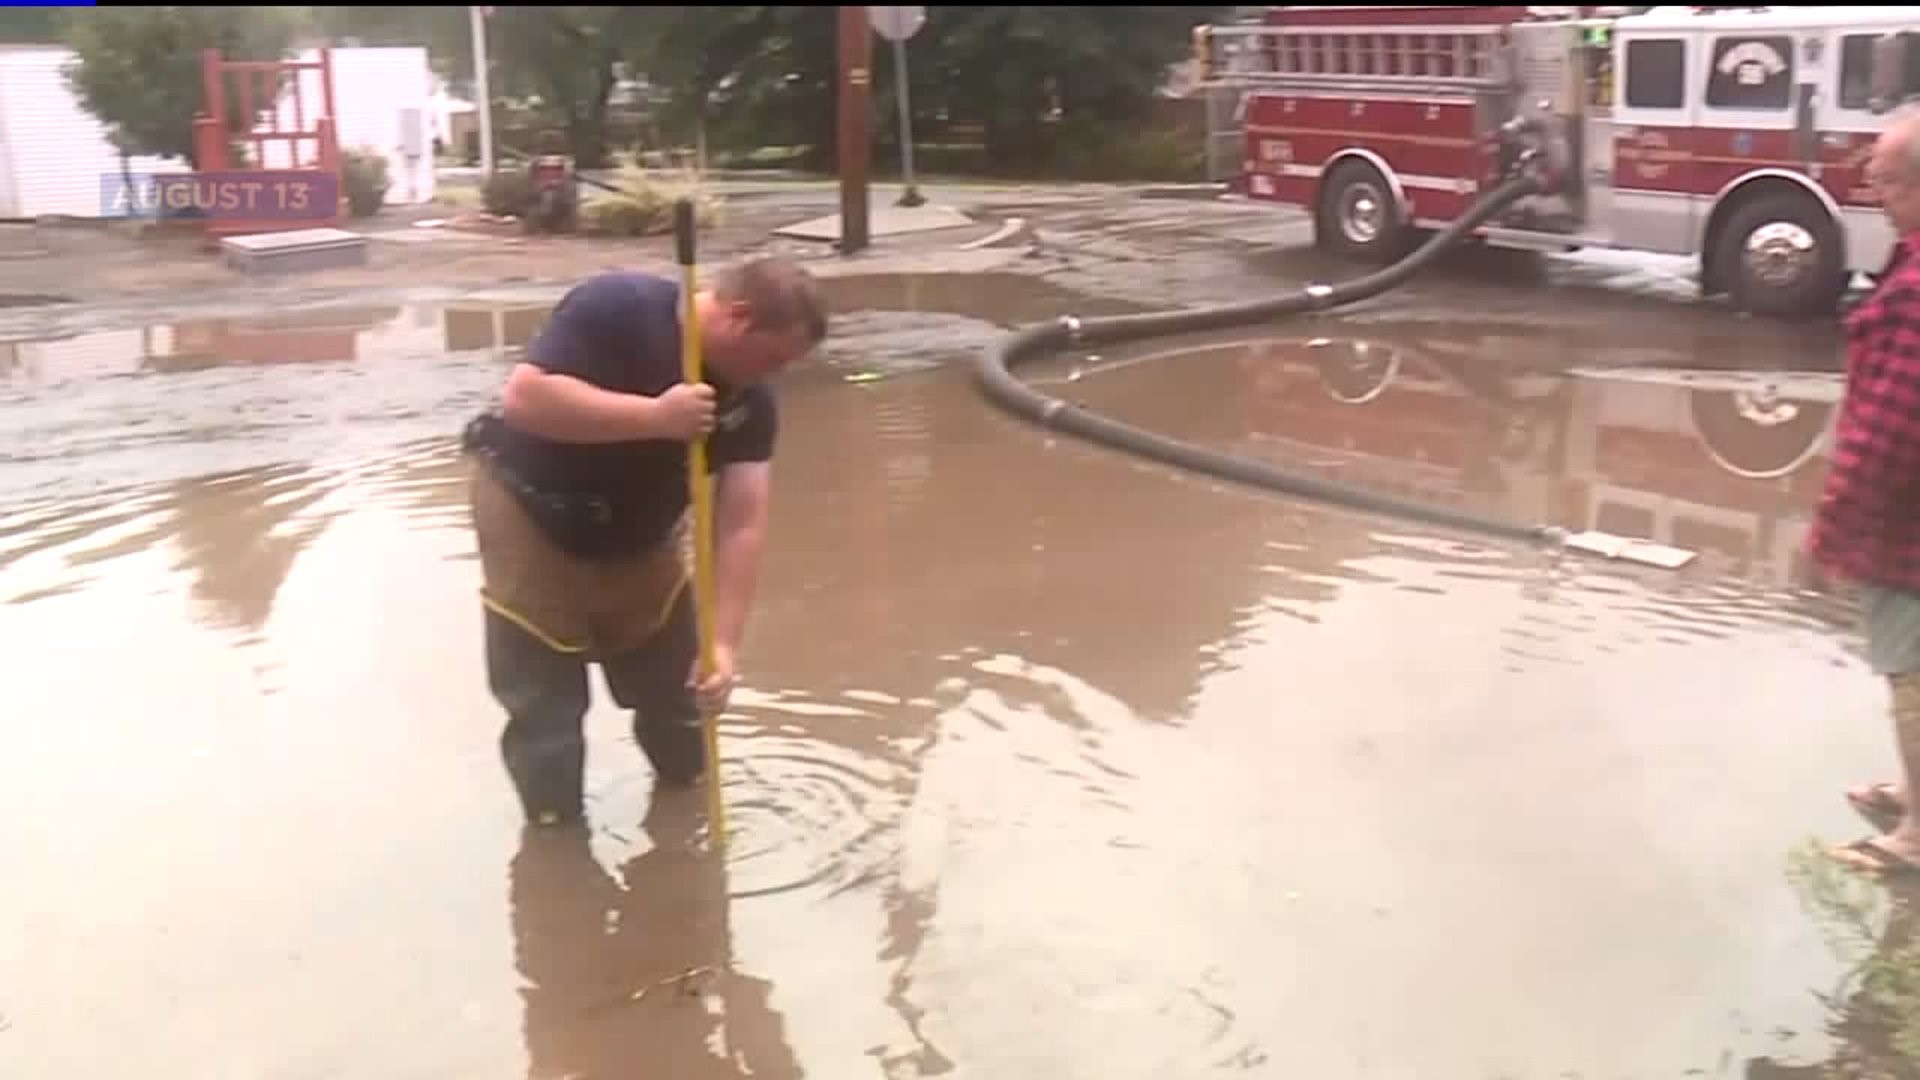 Thanking First Responders for Help During Flooding